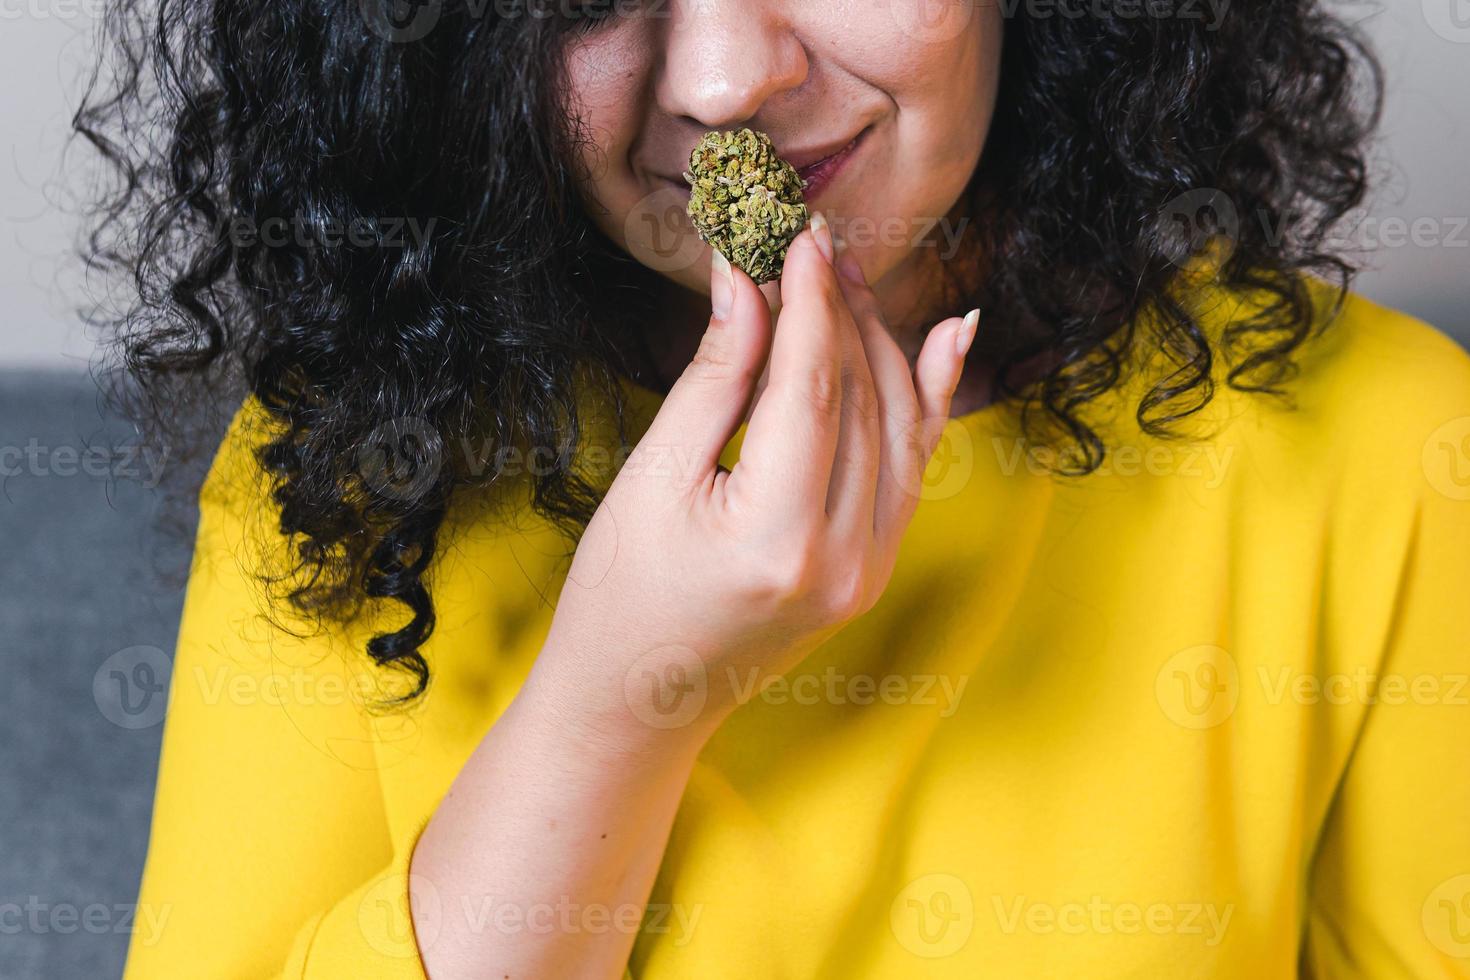 Adult woman holding in the hand medical marijuana buds, close up photo